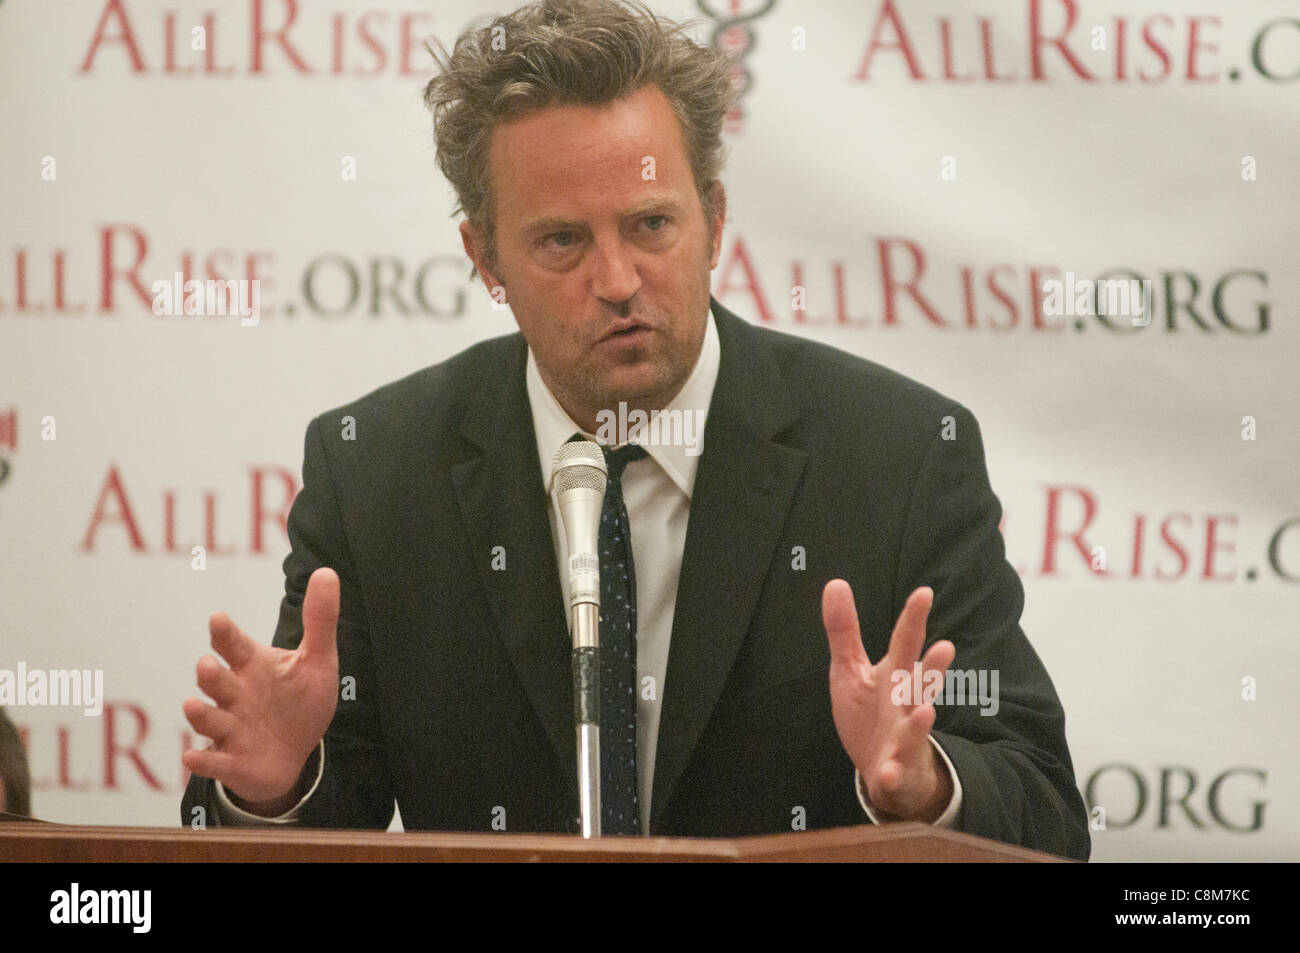 Actor Matthew Perry speaks during the National Association of Drug Court Professionals; and the House Addiction, Treatment and Recovery Caucus briefing on 'Drug Courts and Veterans Treatment Courts: A Proven Budget Solution Serving Our Veterans' on Capitol Hill in Washington D.C. on Thursday October Stock Photo